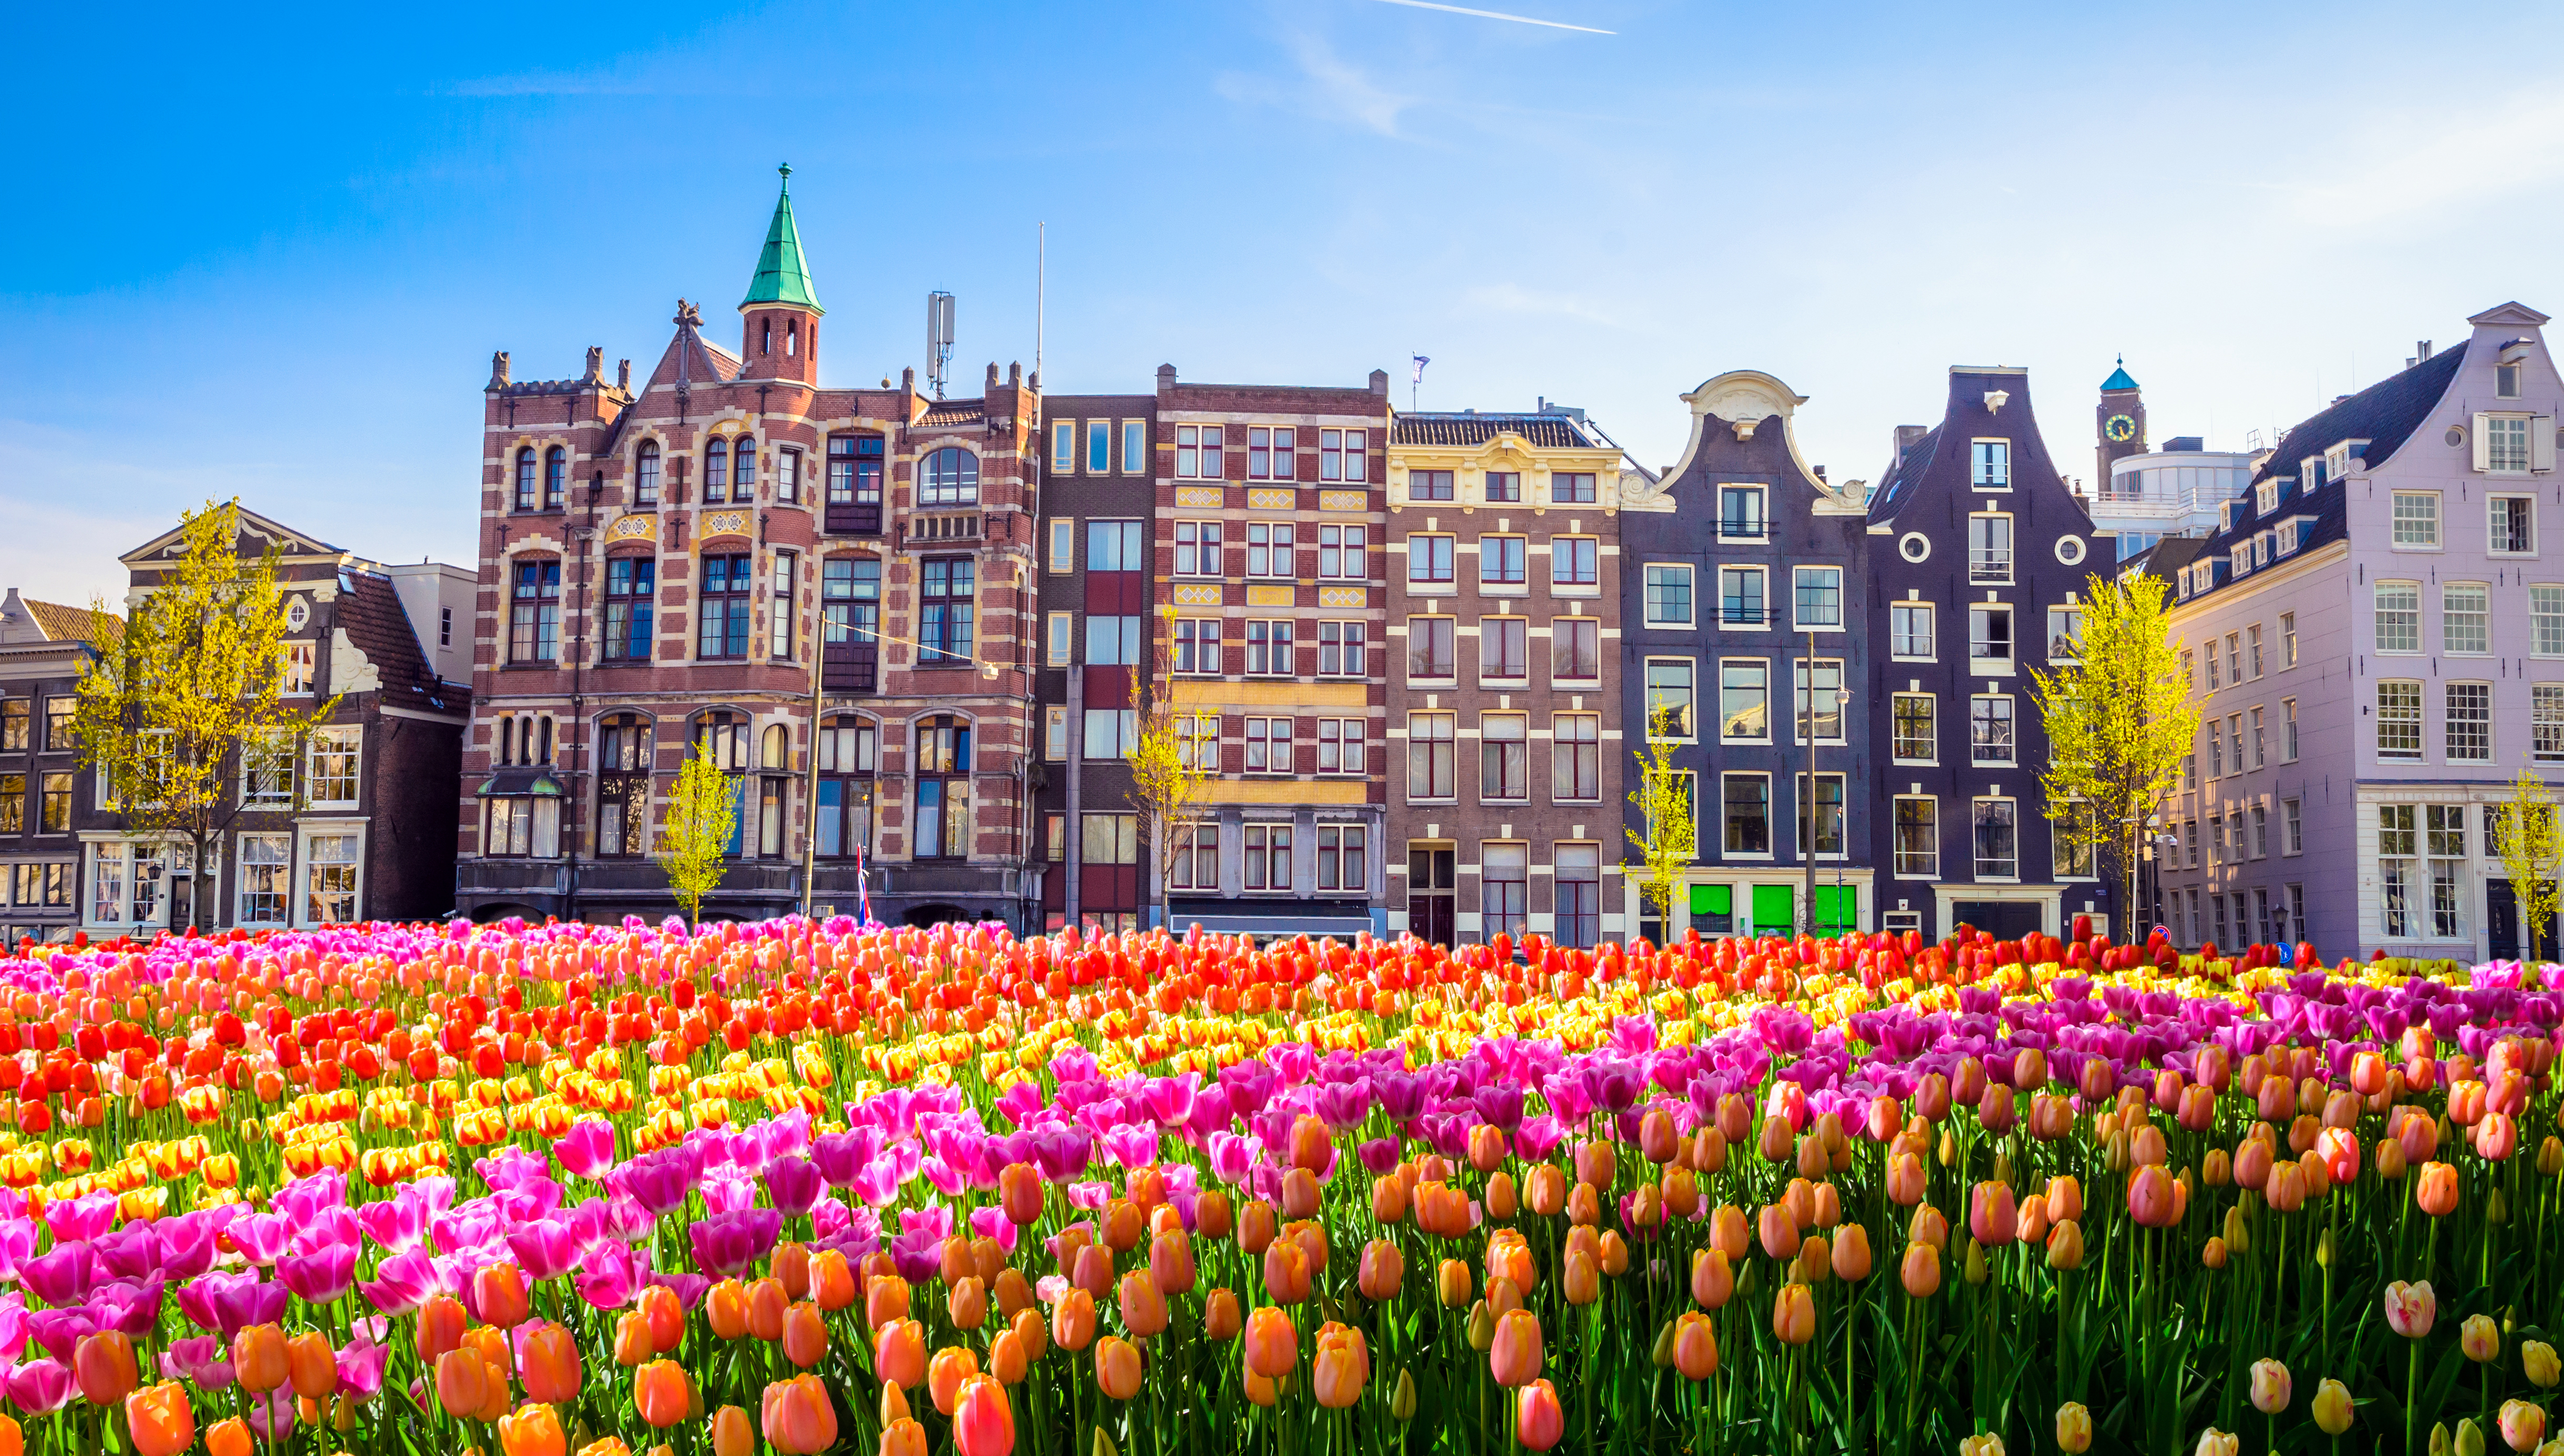 The capital of the Netherlands is the city of 1200 bridges. It has beautiful canals and is home to the royal palace in its old town. Running in Amsterdam also means visiting its red light district and admiring its flowery shops.